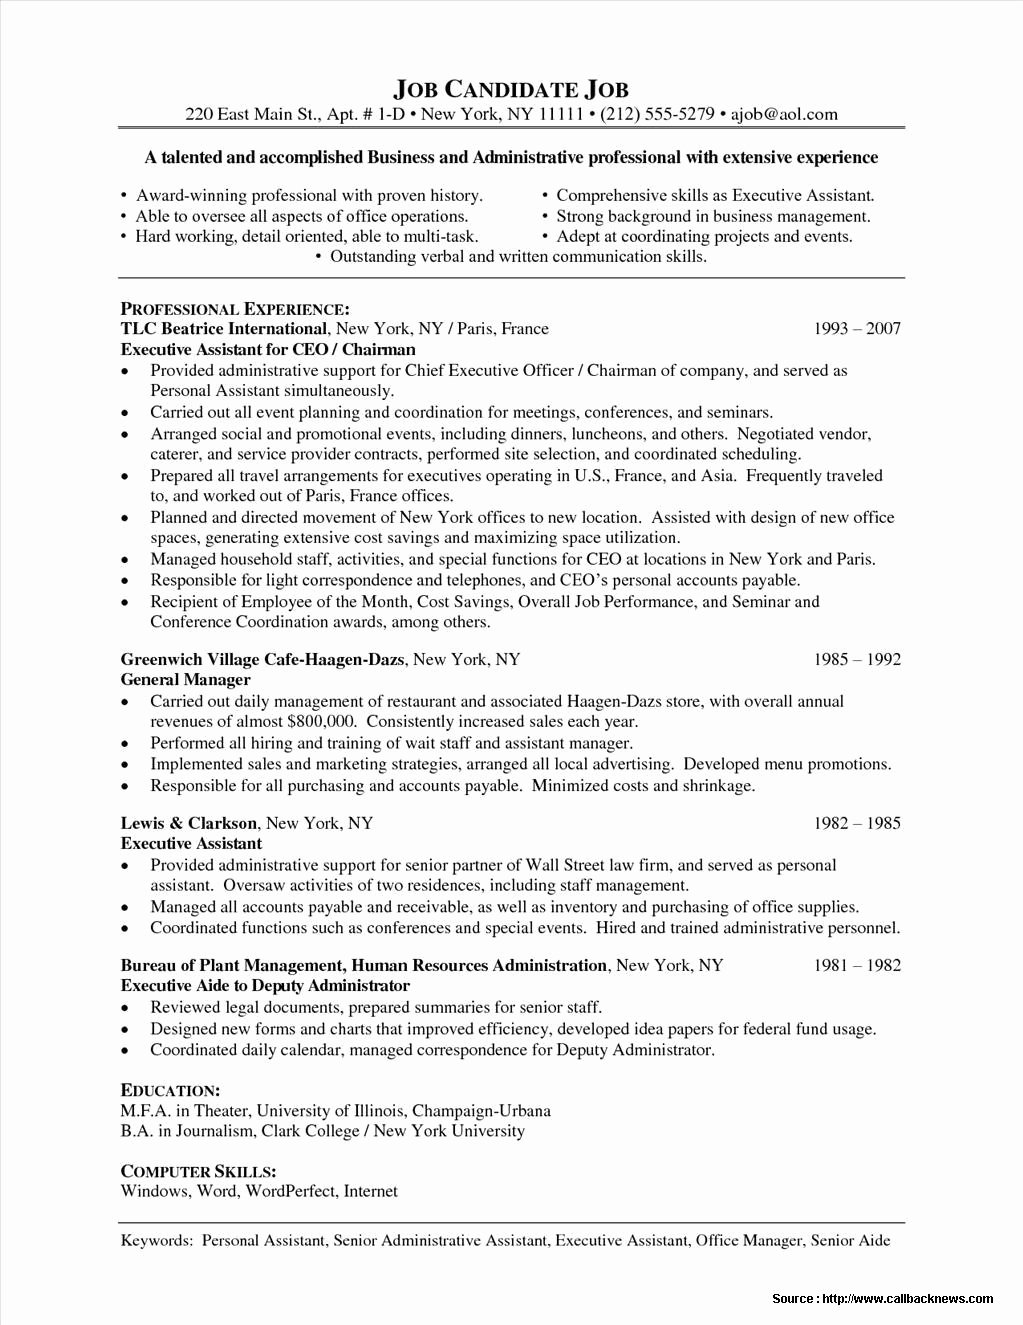 Free Sample Executive Administrative assistant Resume